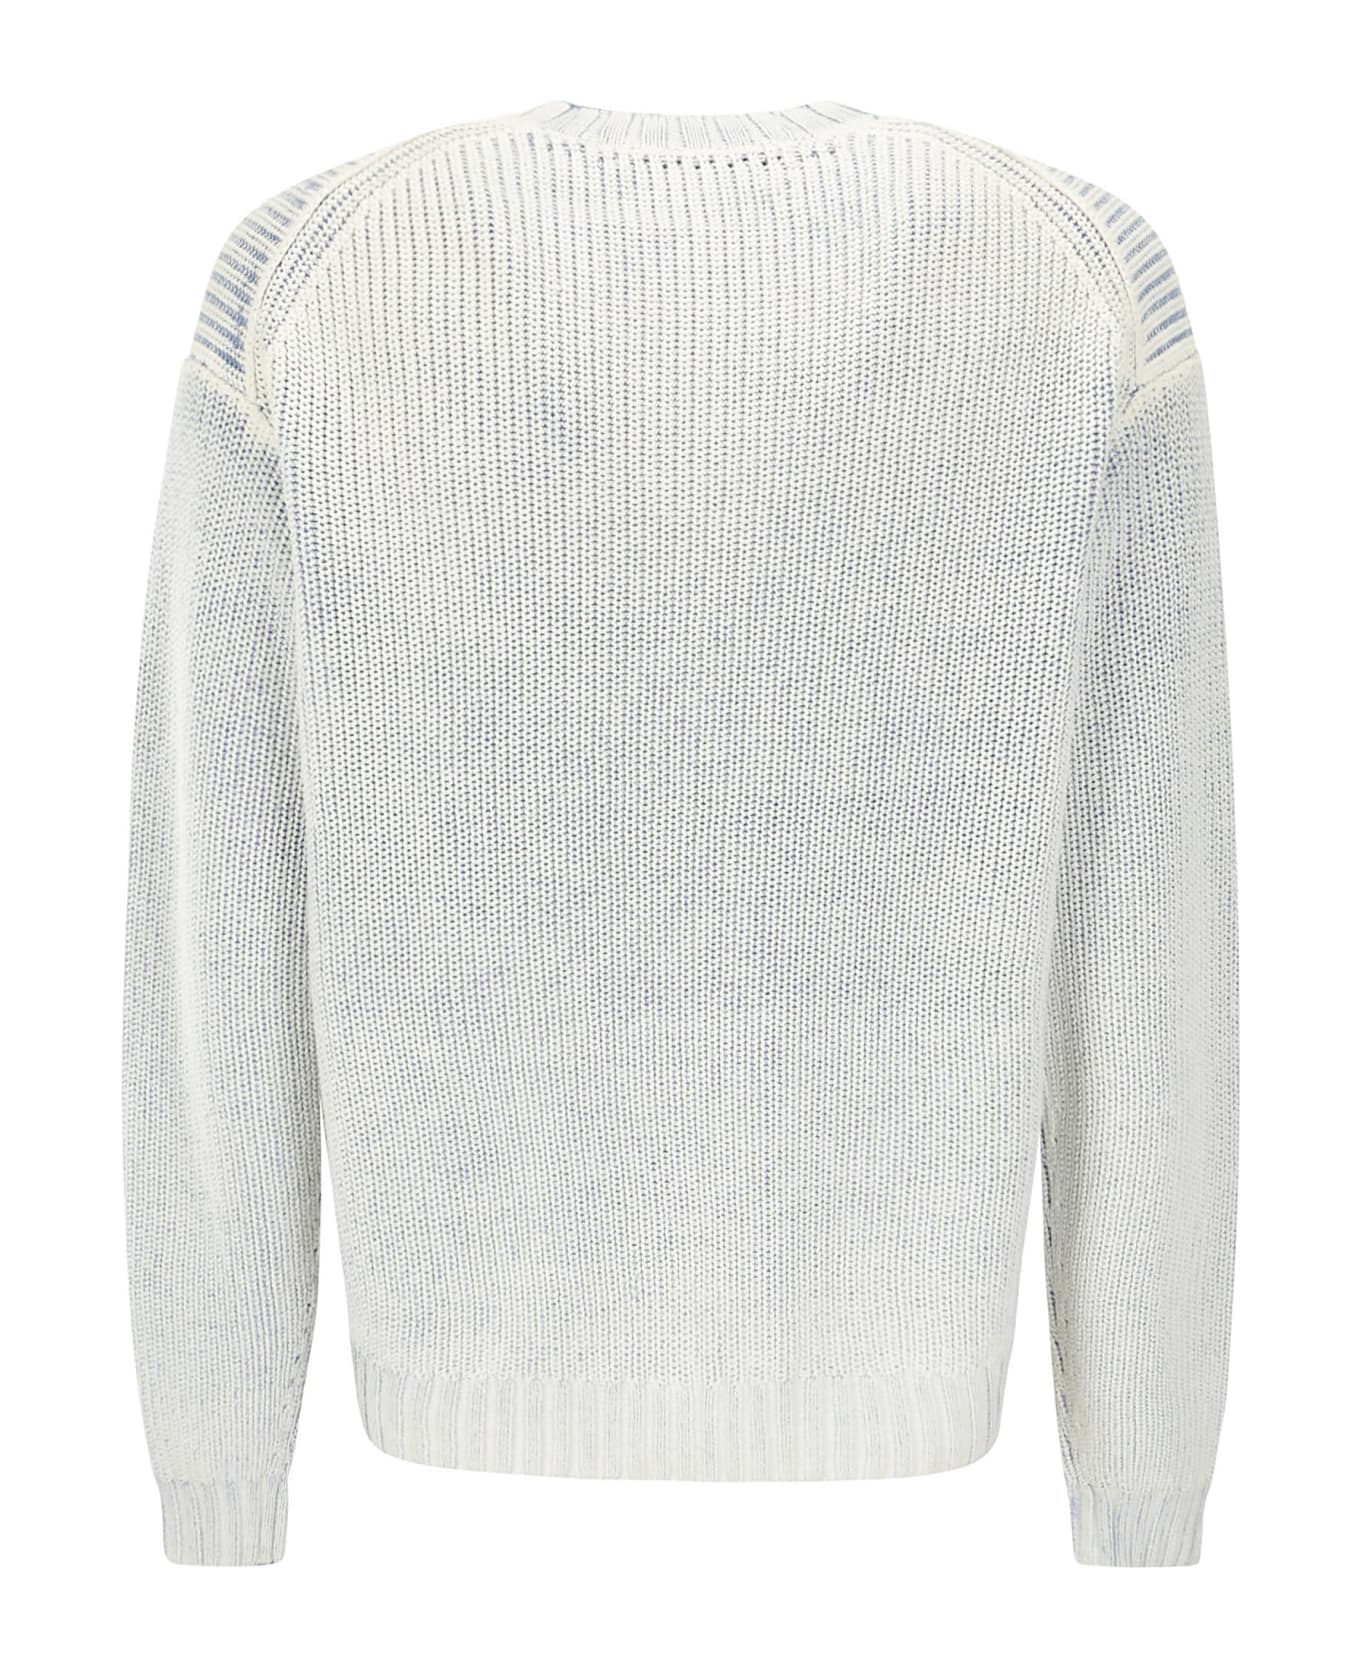 Acne Studios Logo Patch Knitted Jumper - OLD BLUE/WHITE